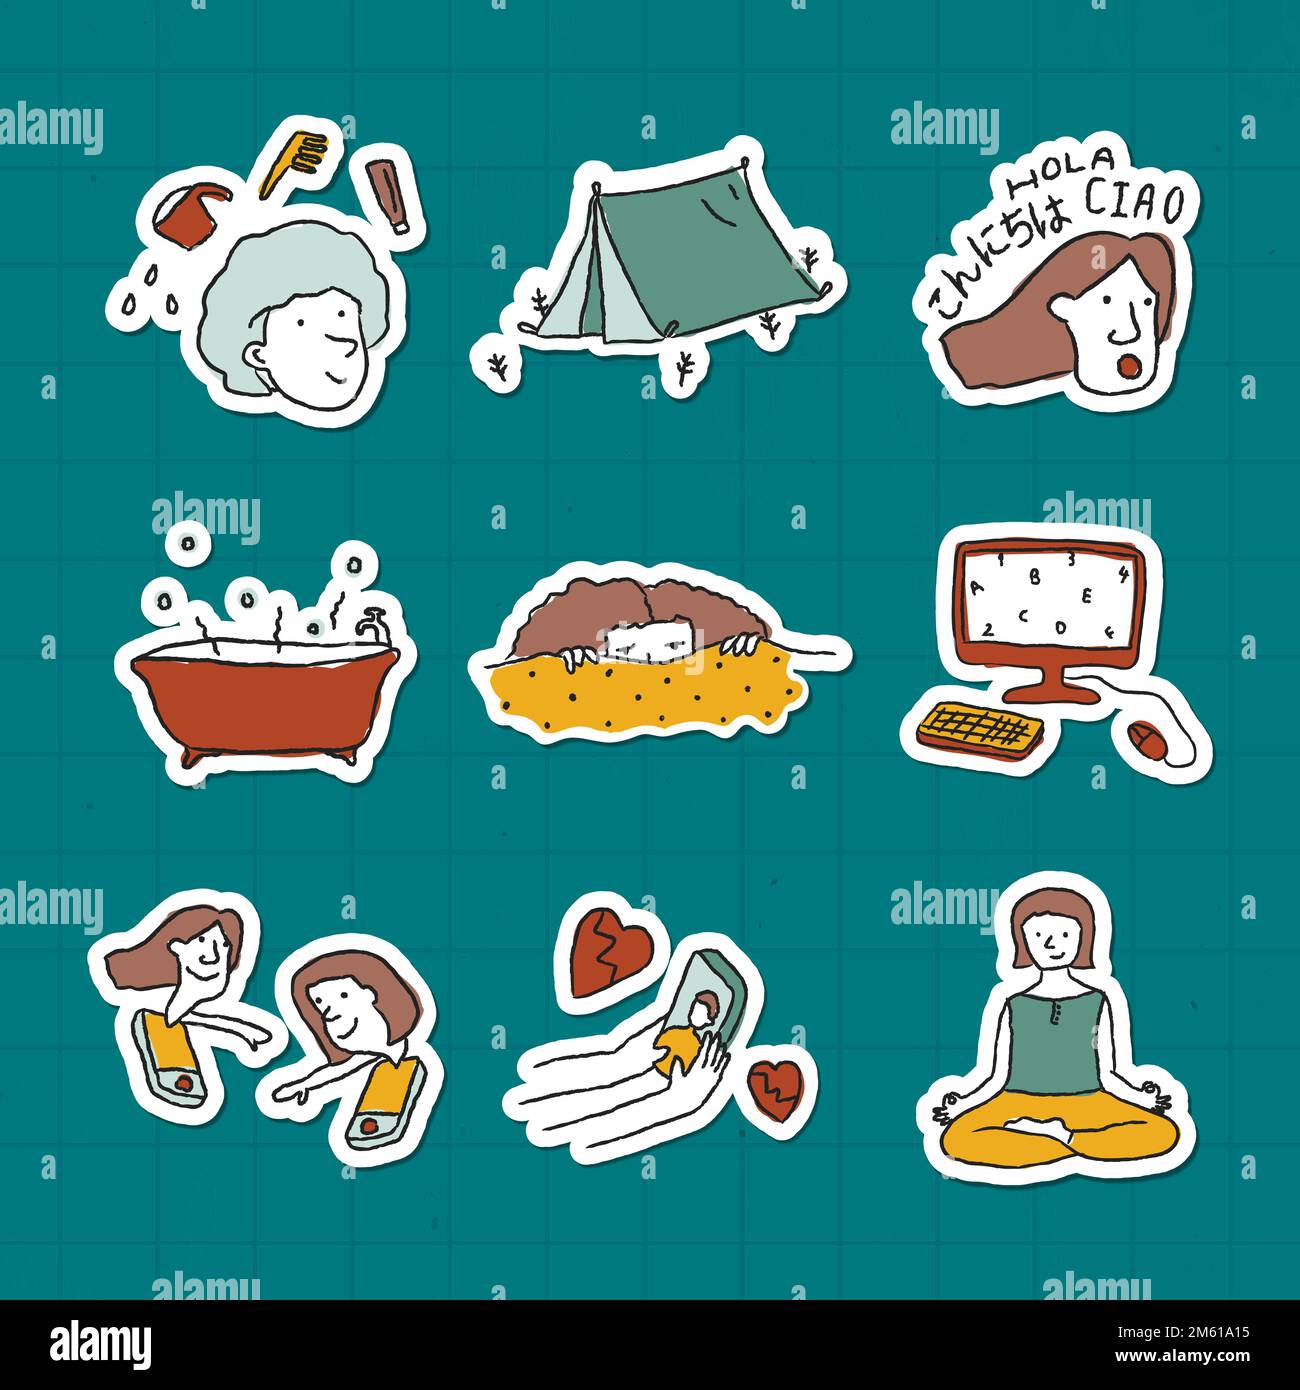 Stuck at home to do list doodle sticker vector Stock Vector